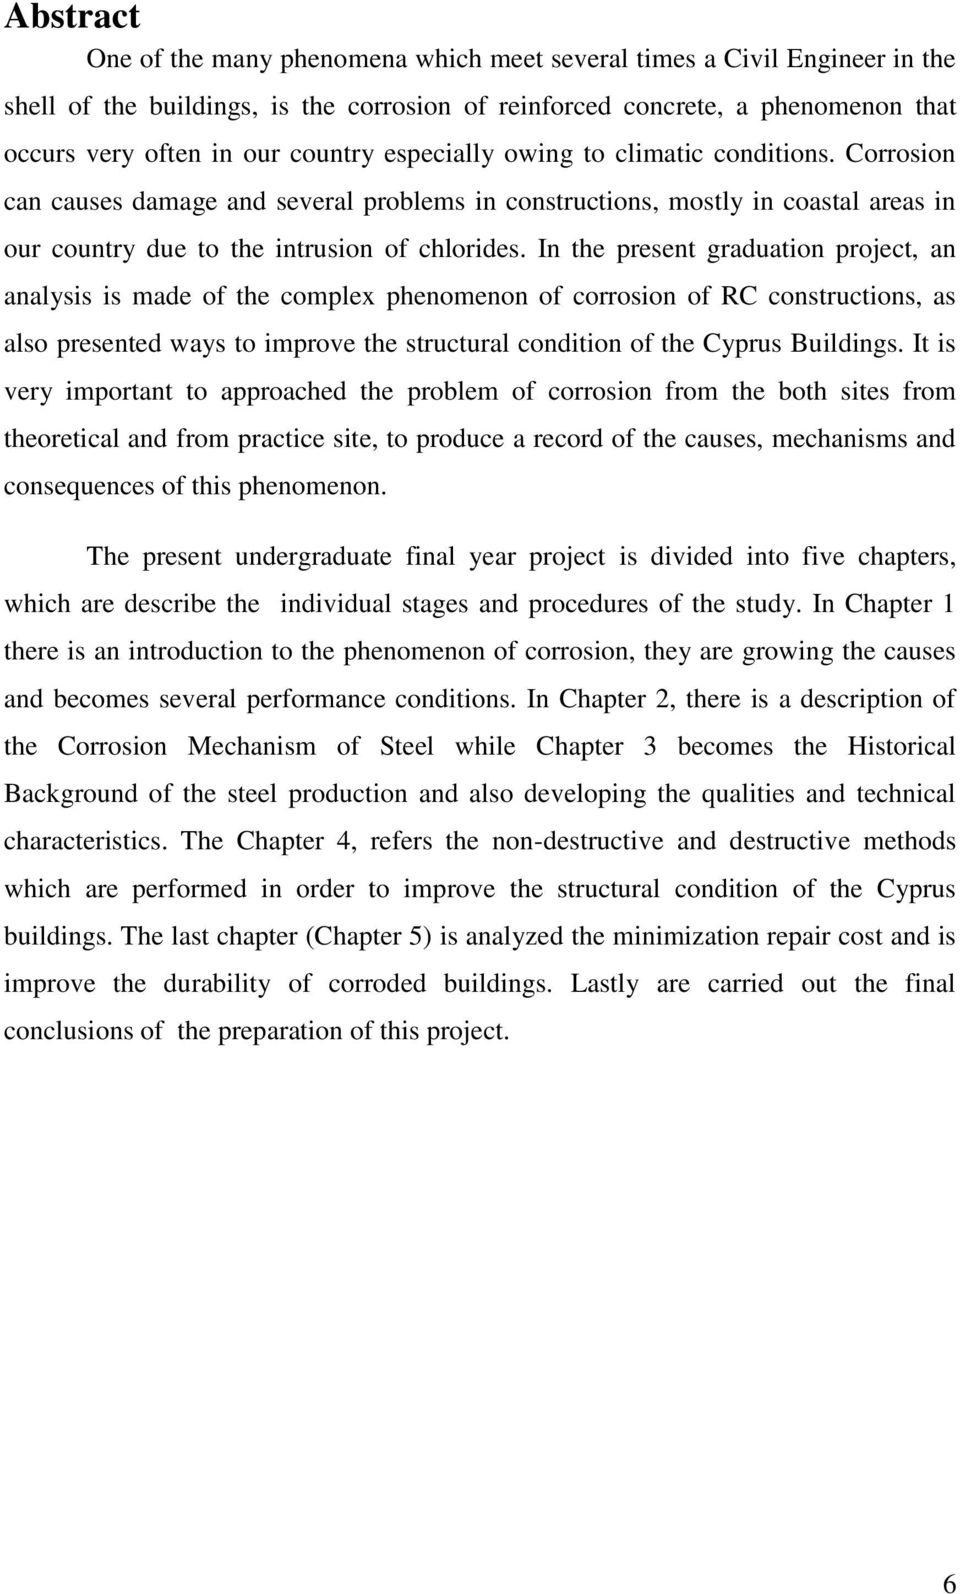 In the present graduation project, an analysis is made of the complex phenomenon of corrosion of RC constructions, as also presented ways to improve the structural condition of the Cyprus Buildings.